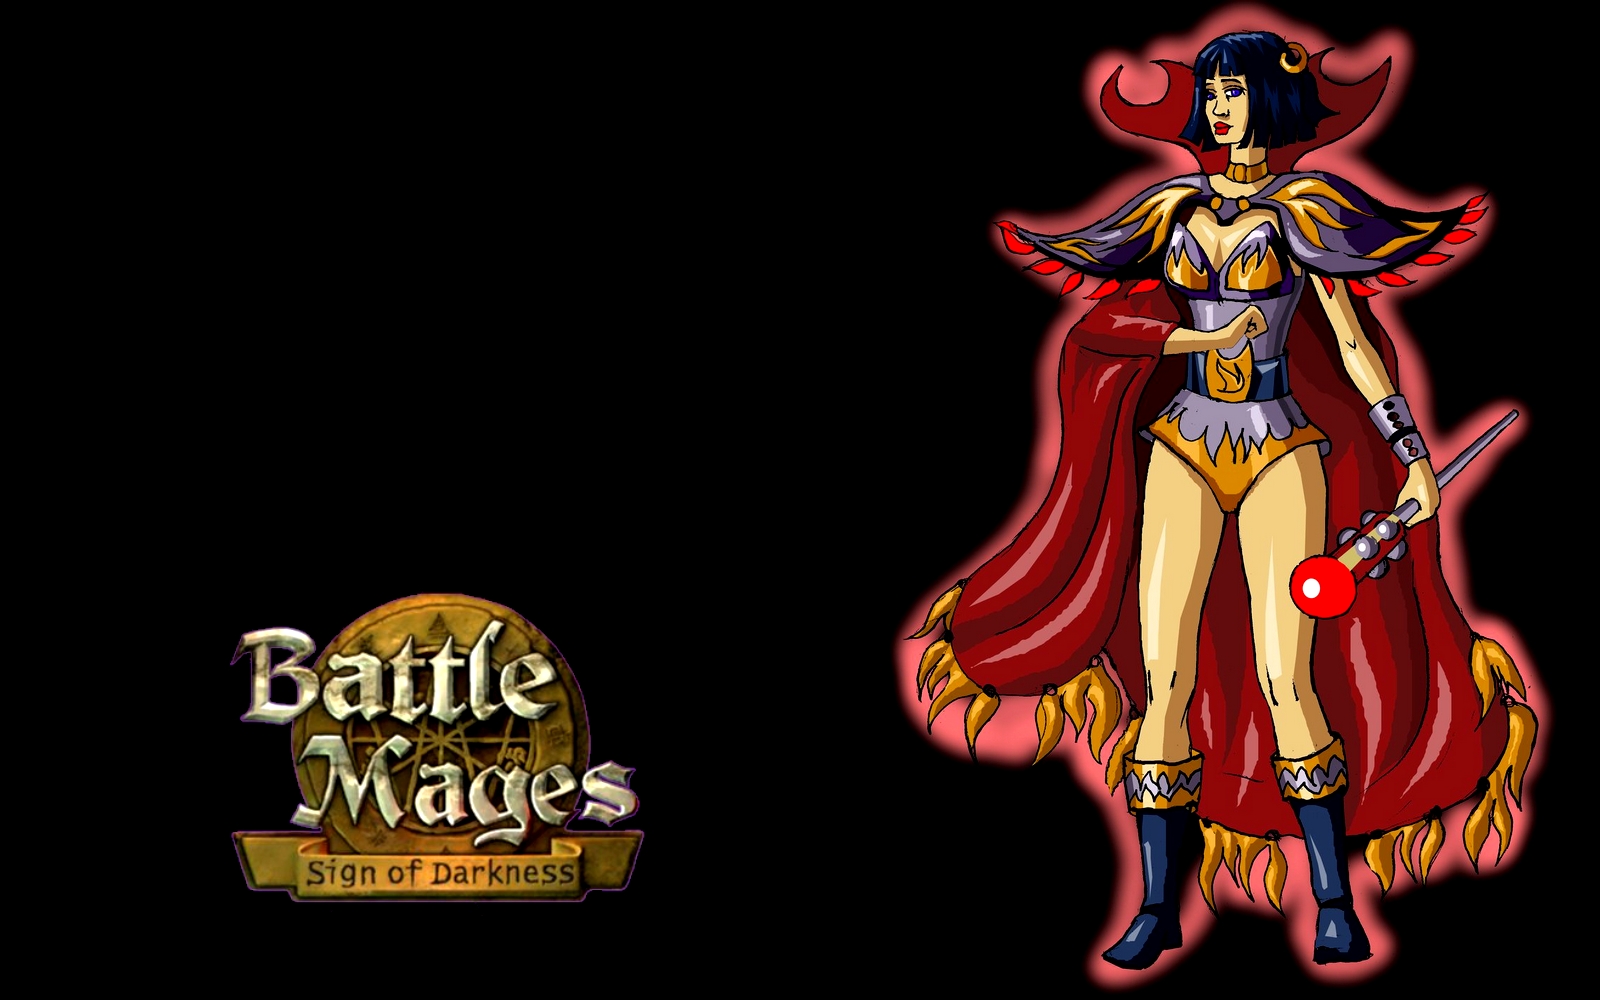 Battle mage. Battle Mages sign of Darkness. Арт руна Battle Mages sign of Darkness. Игра Battle Mages 2003. Pirates of Dark Water.